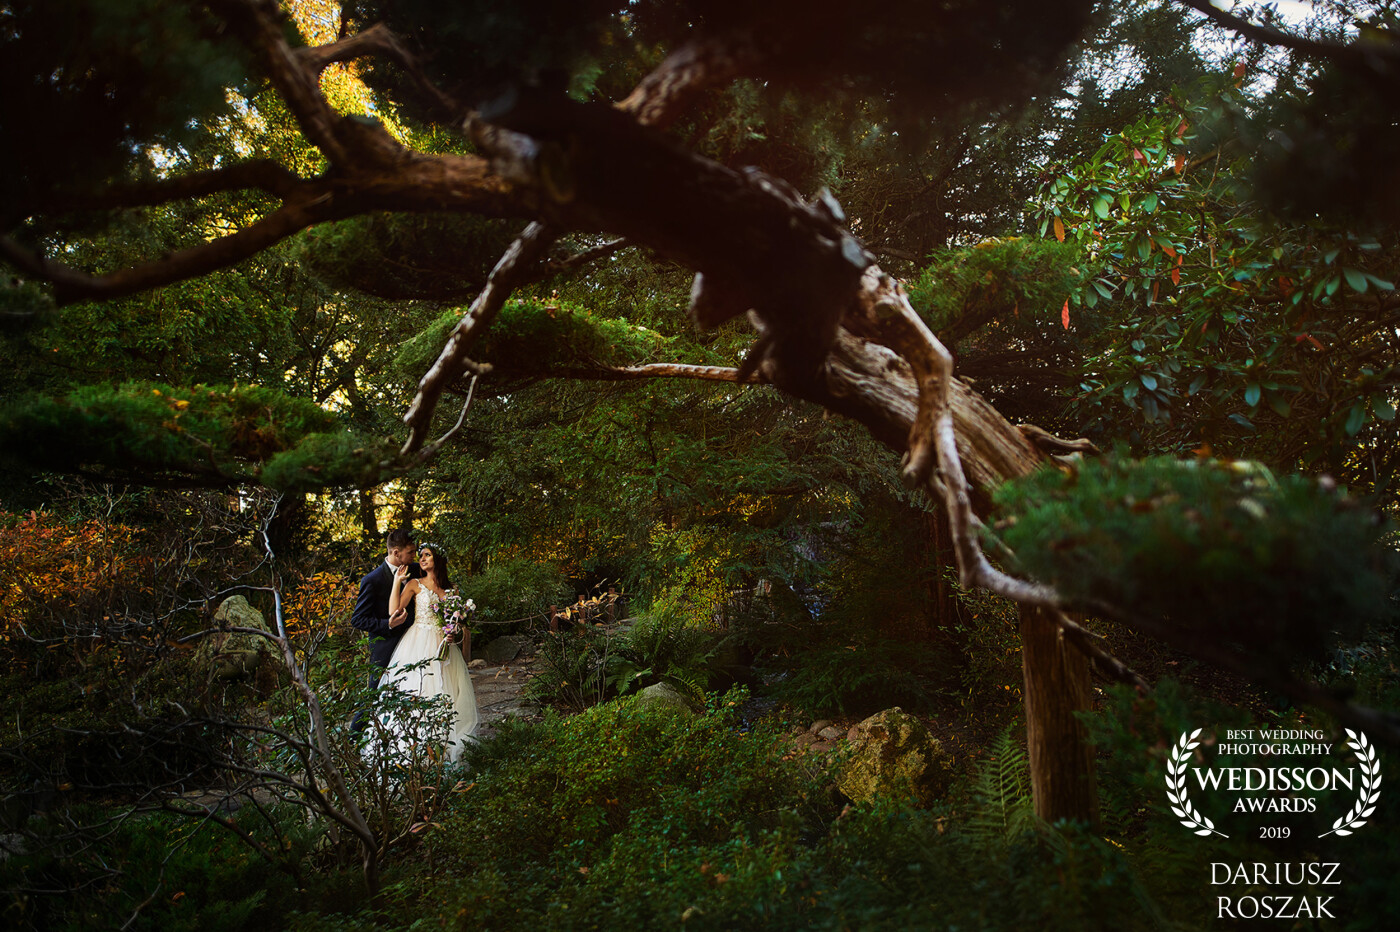 The photo was taken in a beautiful Japanese garden in Wroclaw (in Poland). An amazing place where a photographer has unlimited possibilities. The young couple was very willing to cooperate and the effects can be seen in the picture.